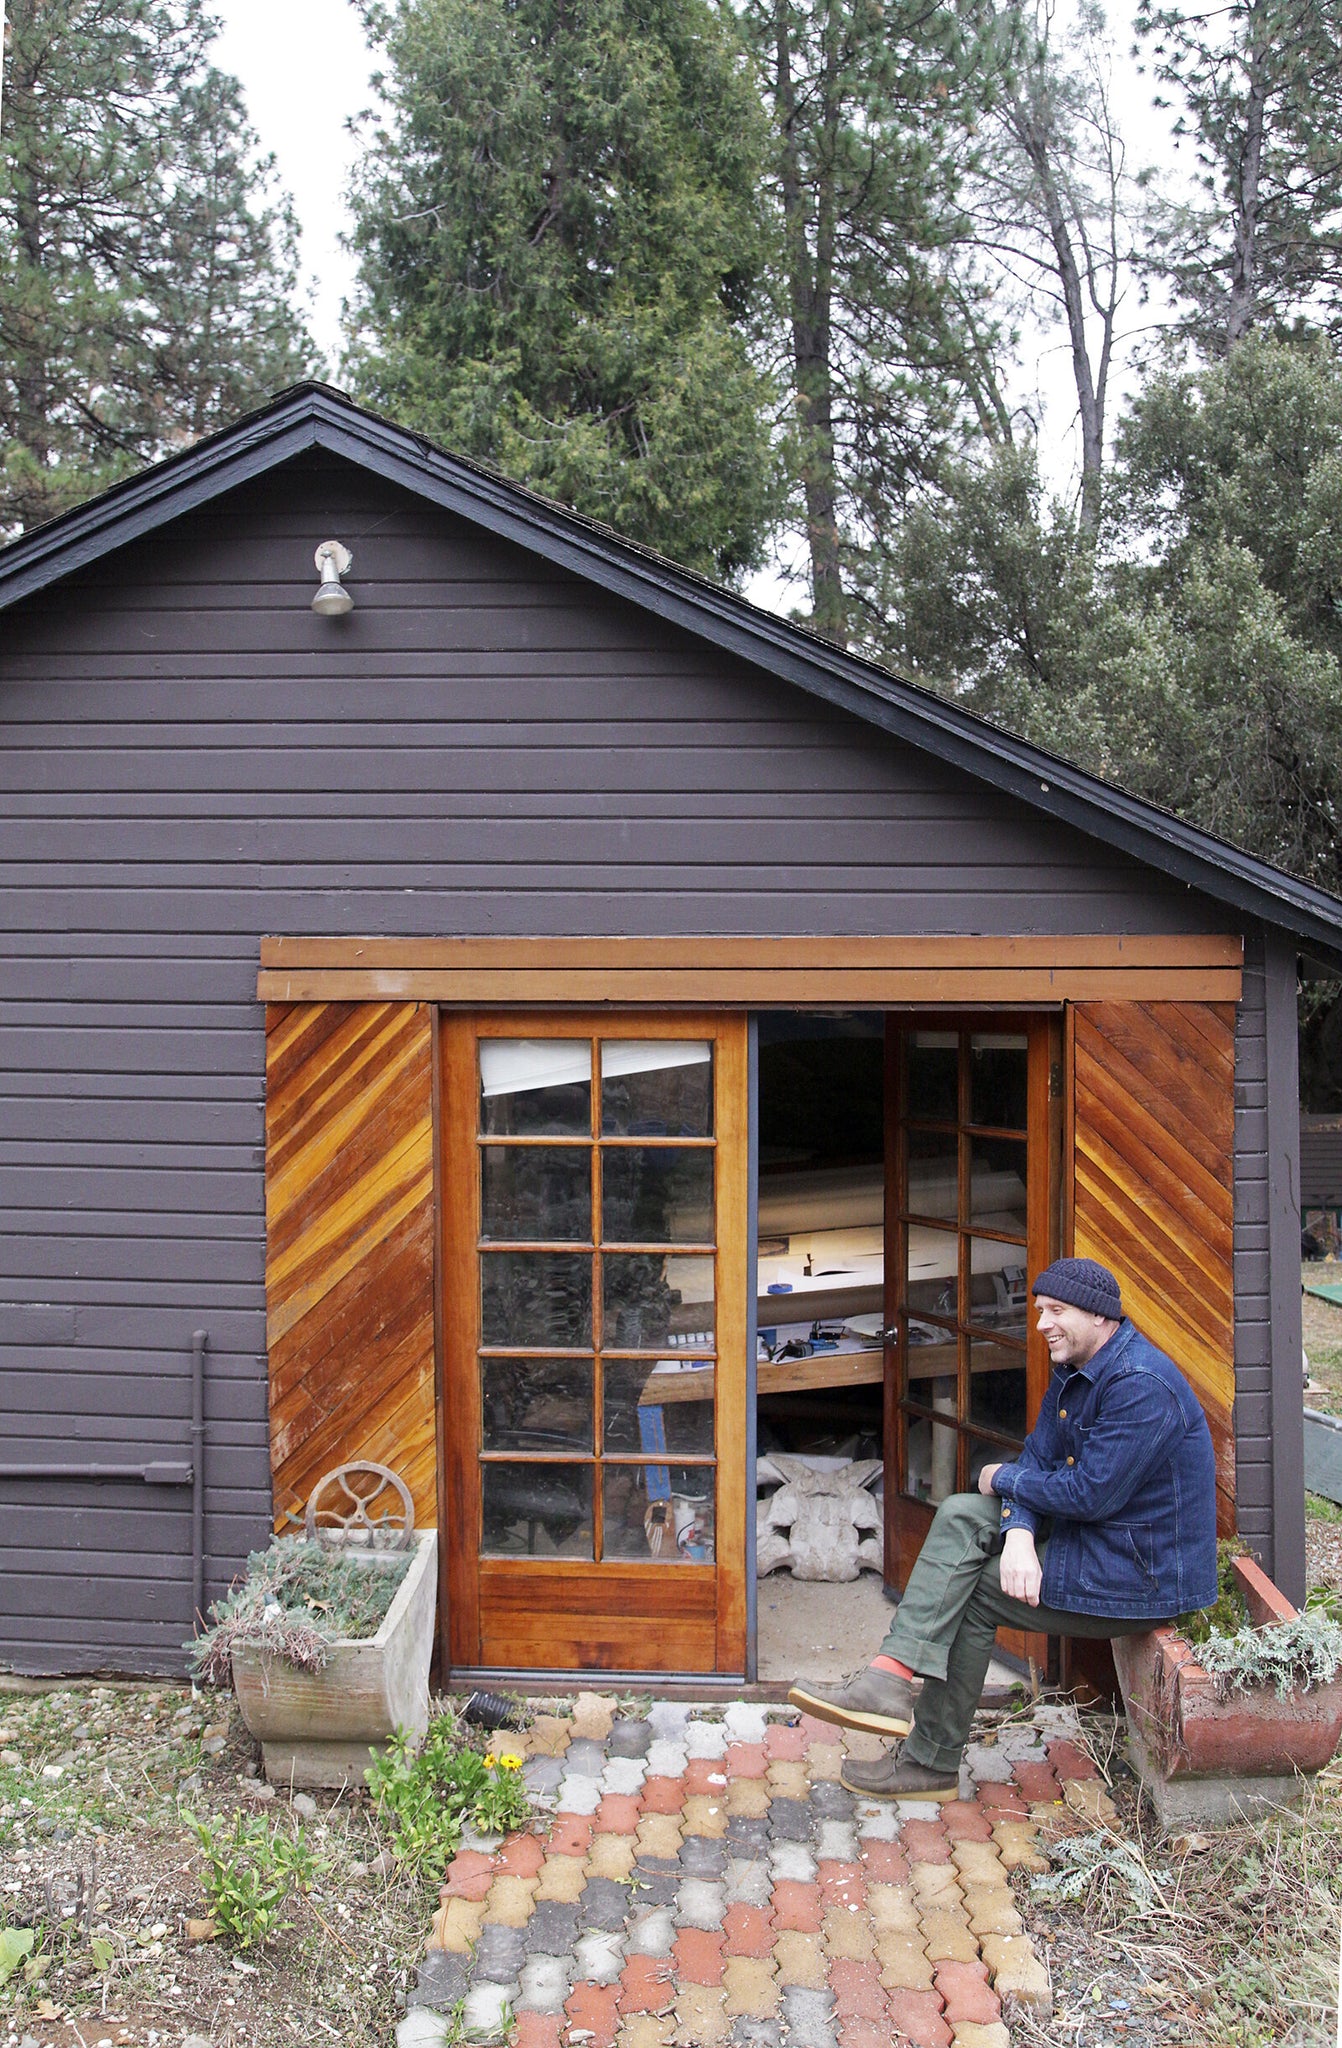 Tahiti Pehrson studio visit in Nevada City for upcoming exhibition at Public Land Gallery